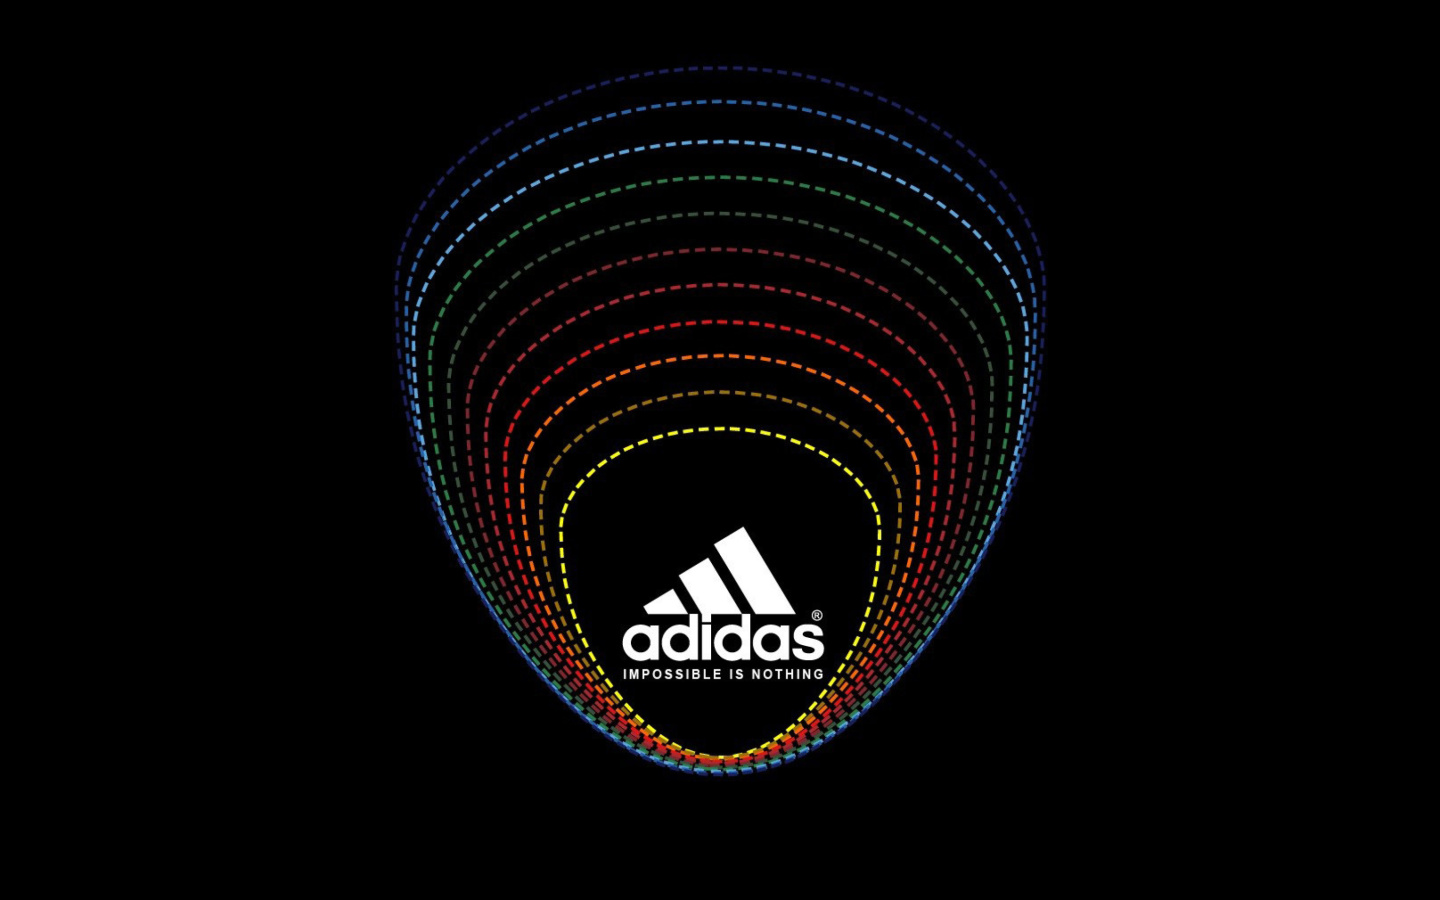 Adidas Tagline, Impossible is Nothing screenshot #1 1440x900